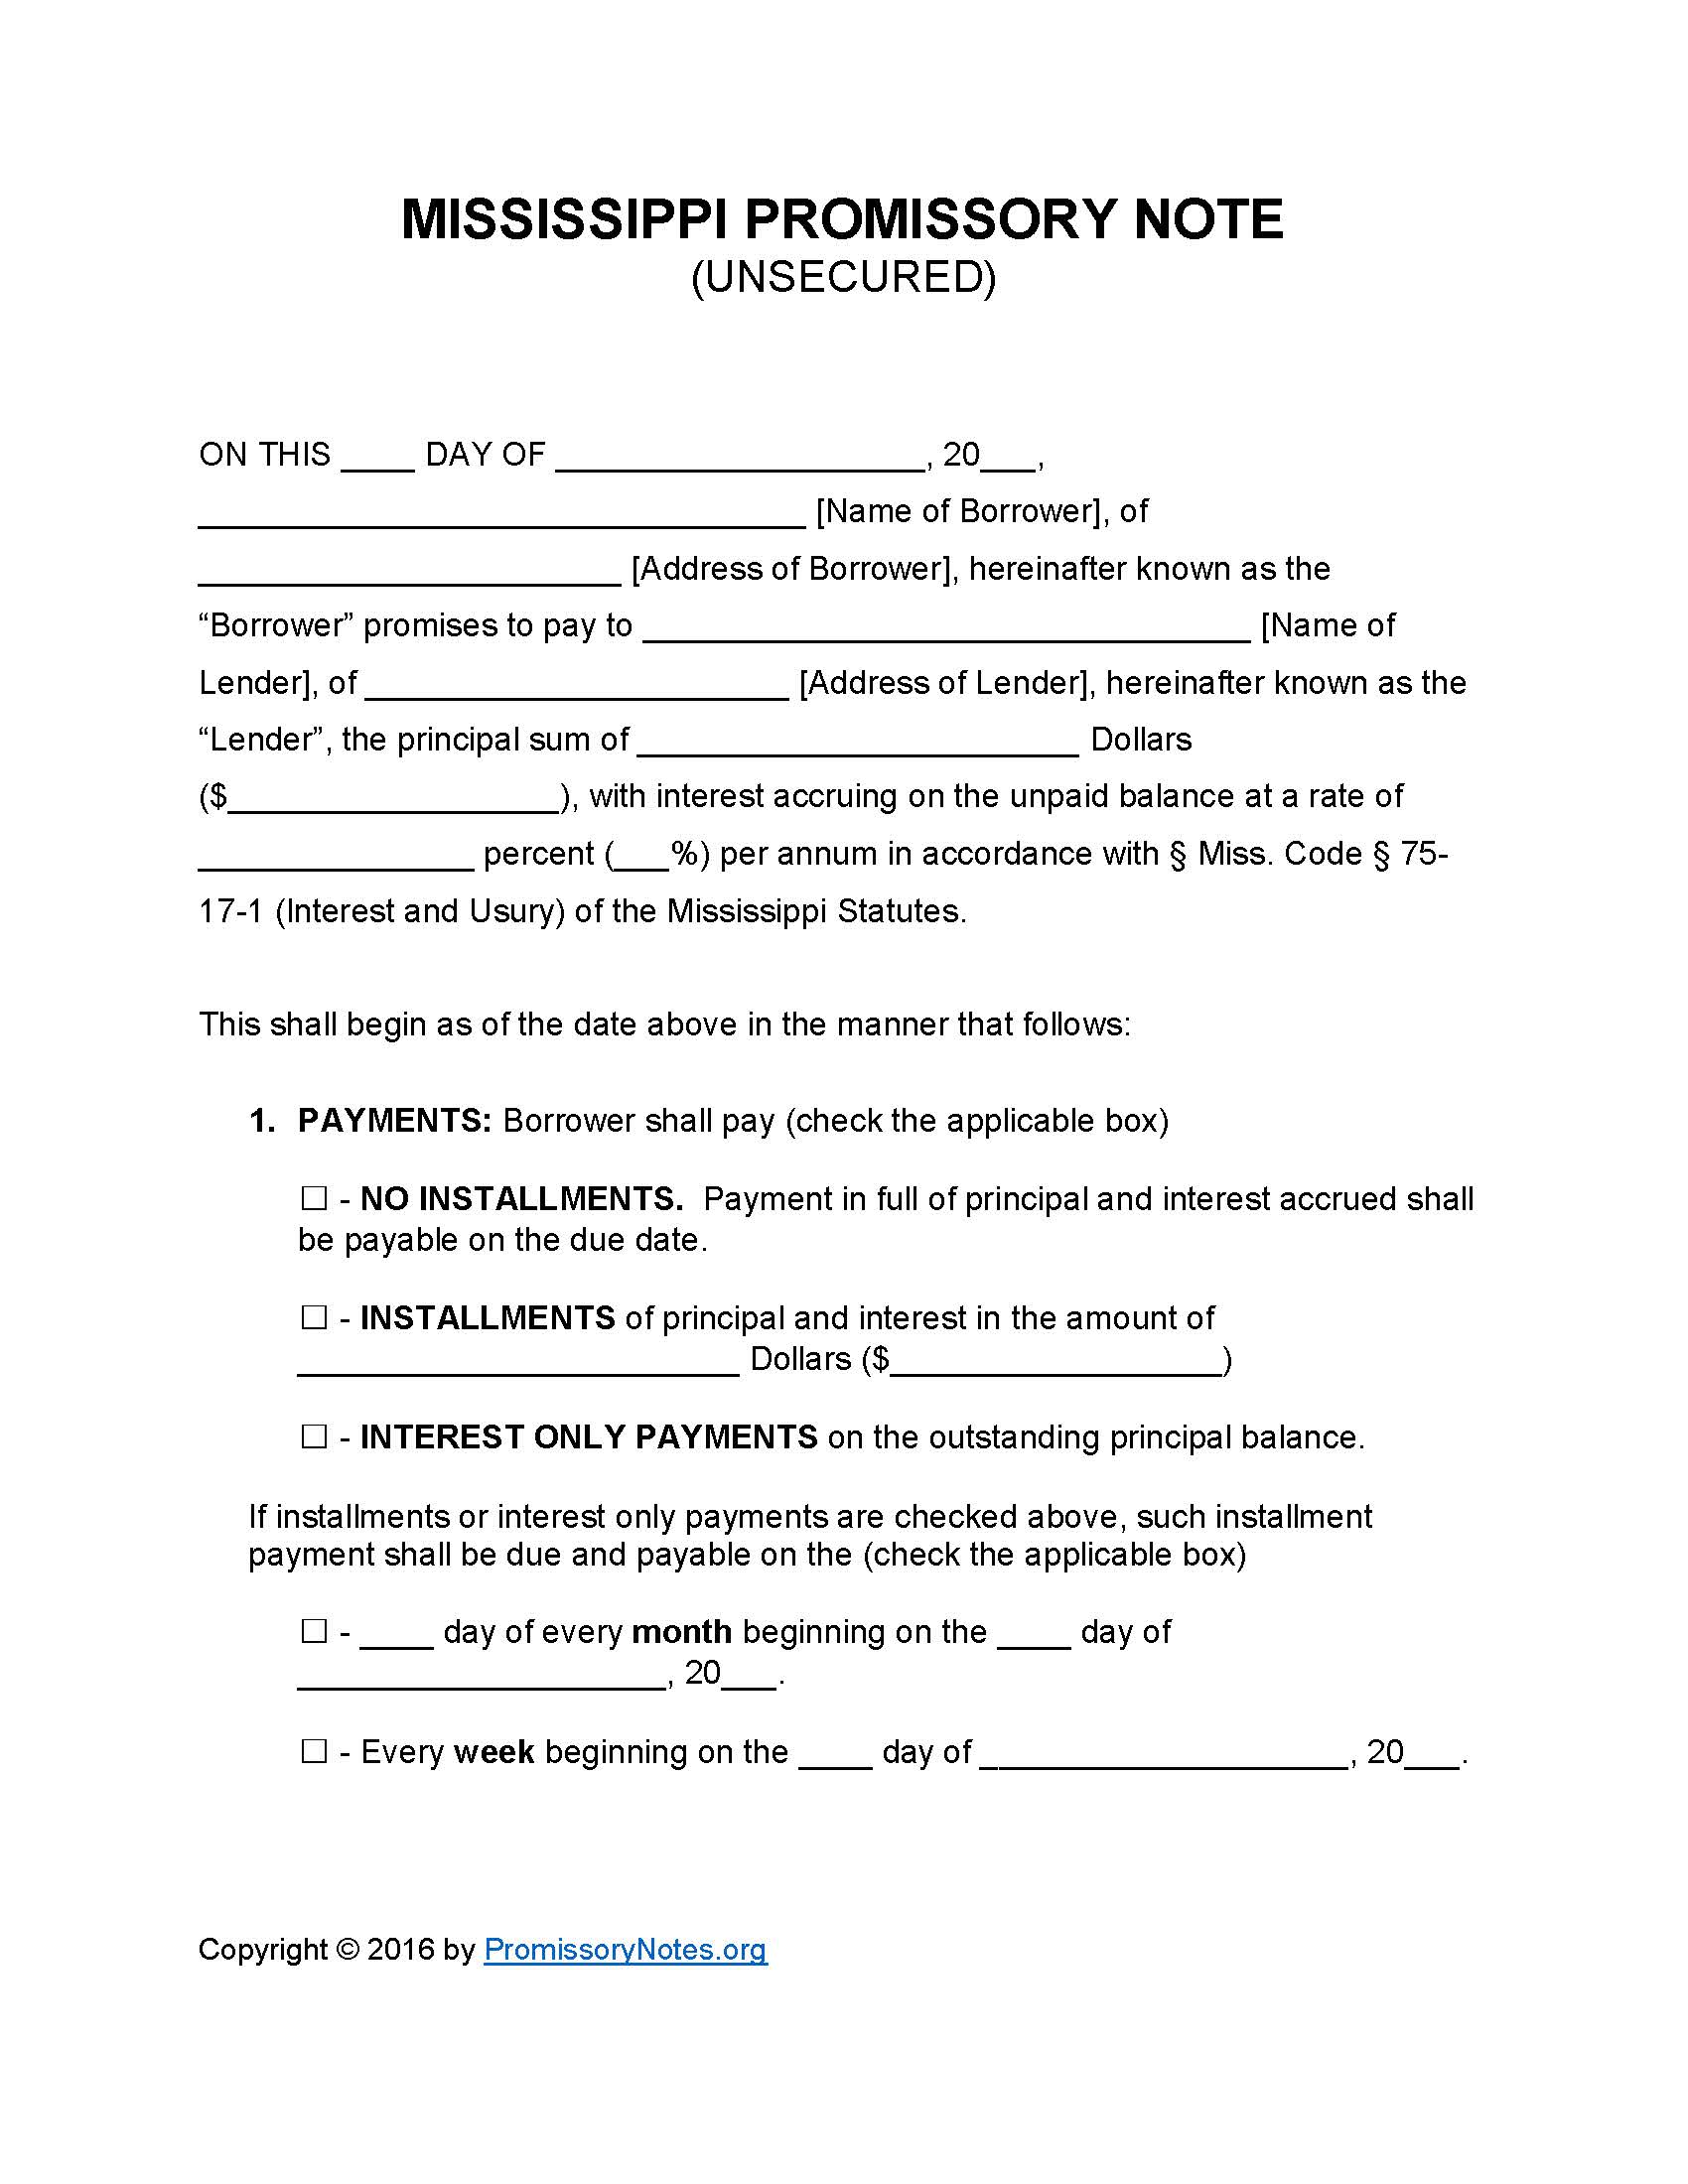 mississippi-unsecured-promissory-note-form